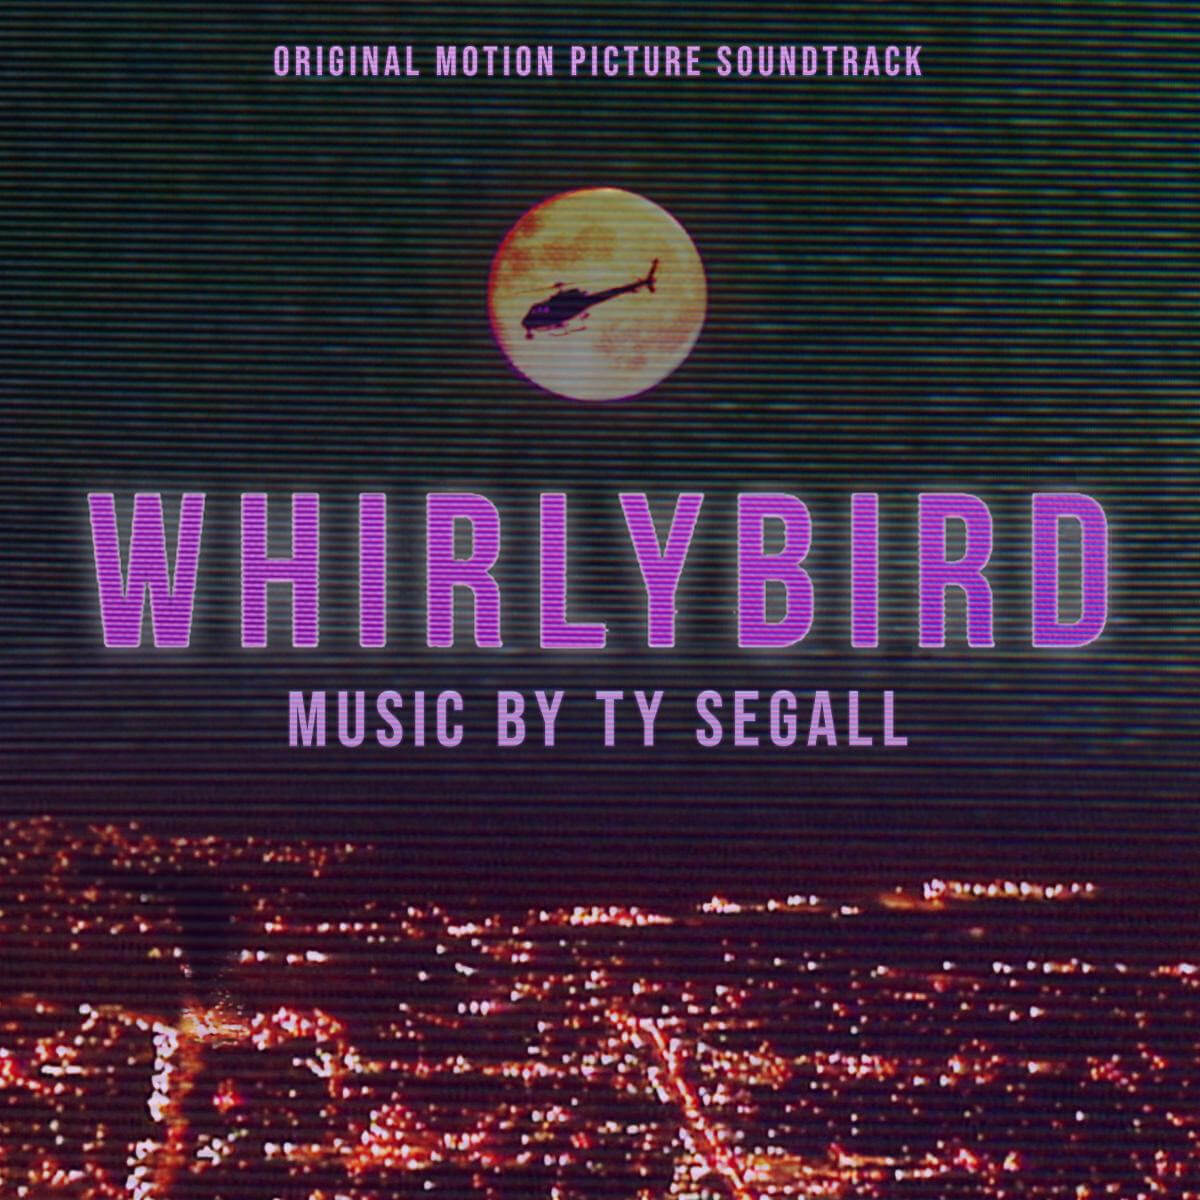 The Original Motion Picture Soundtrack for Whirlybird features all-new music by Ty Segall, which was created for Matt Yoka's new documentary